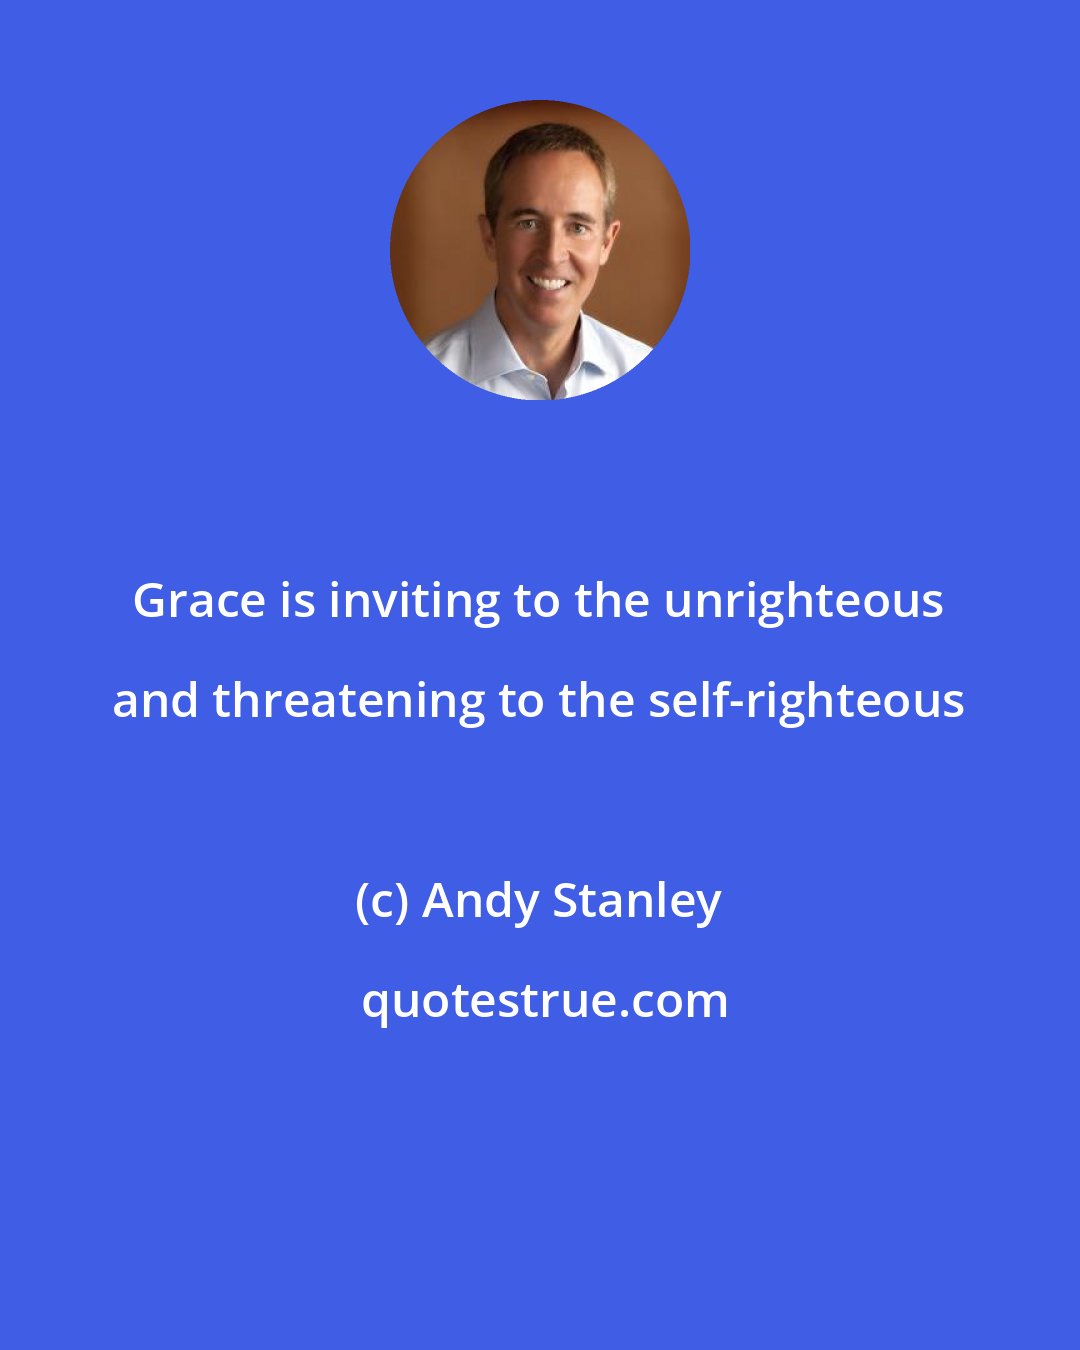 Andy Stanley: Grace is inviting to the unrighteous and threatening to the self-righteous